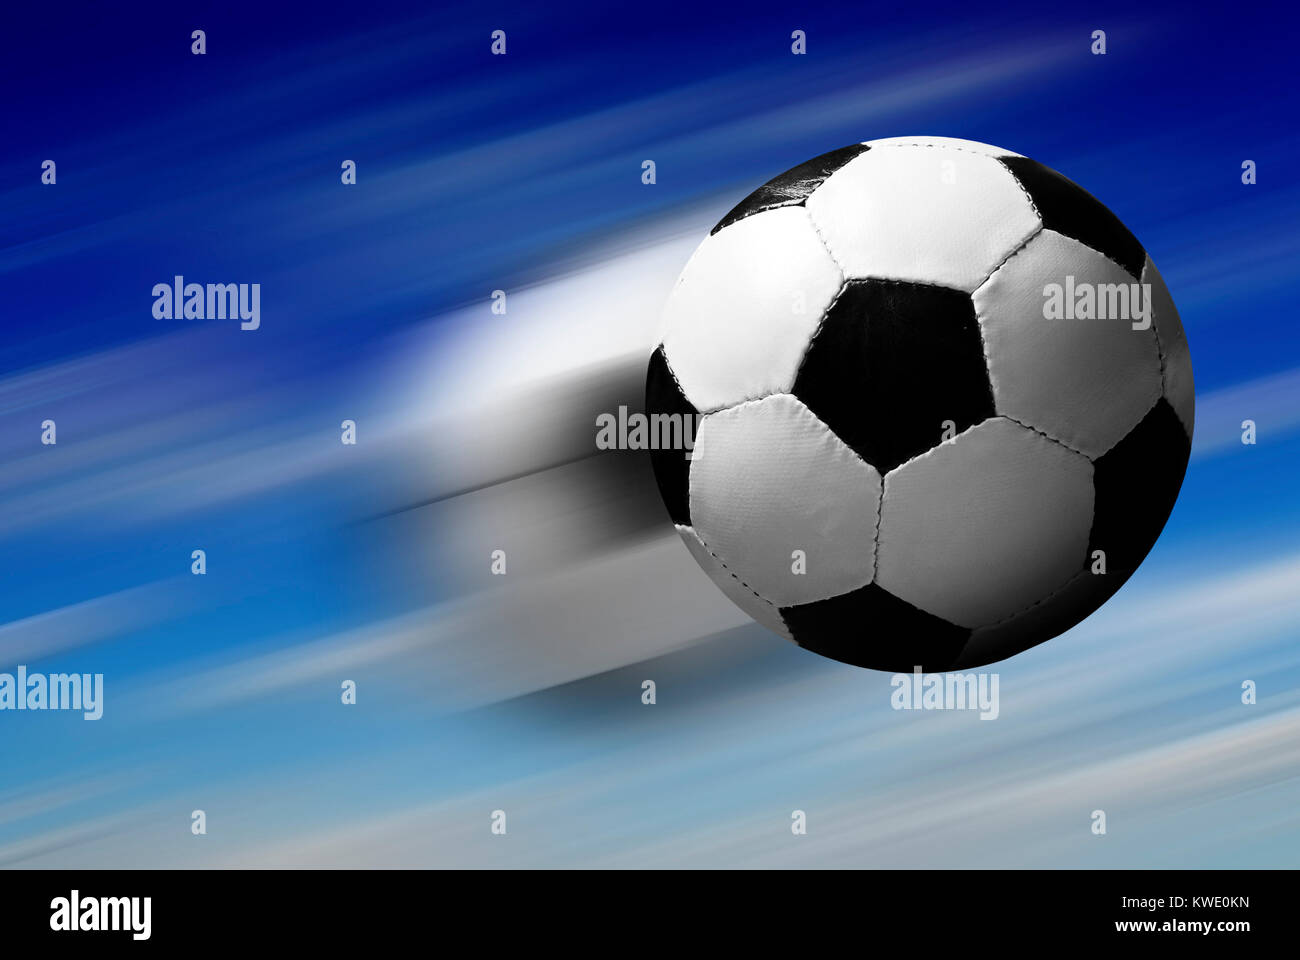 Football Or Soccer Shot With A Neutral Design Ball Being Kicked, With  Motion Blur On The Foot And Natural Background Stock Photo, Picture and  Royalty Free Image. Image 27280599.